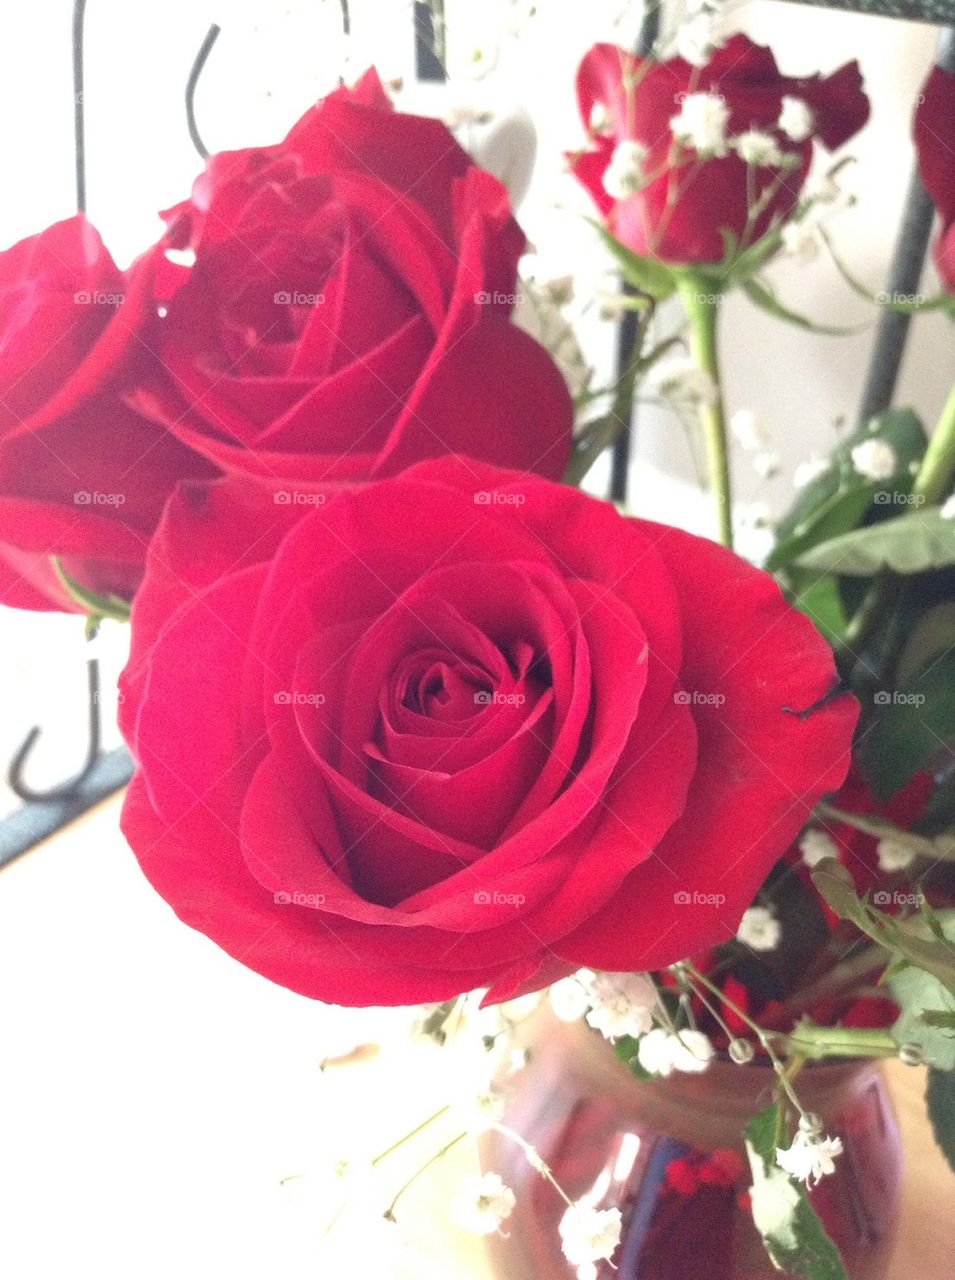 Roses are red!